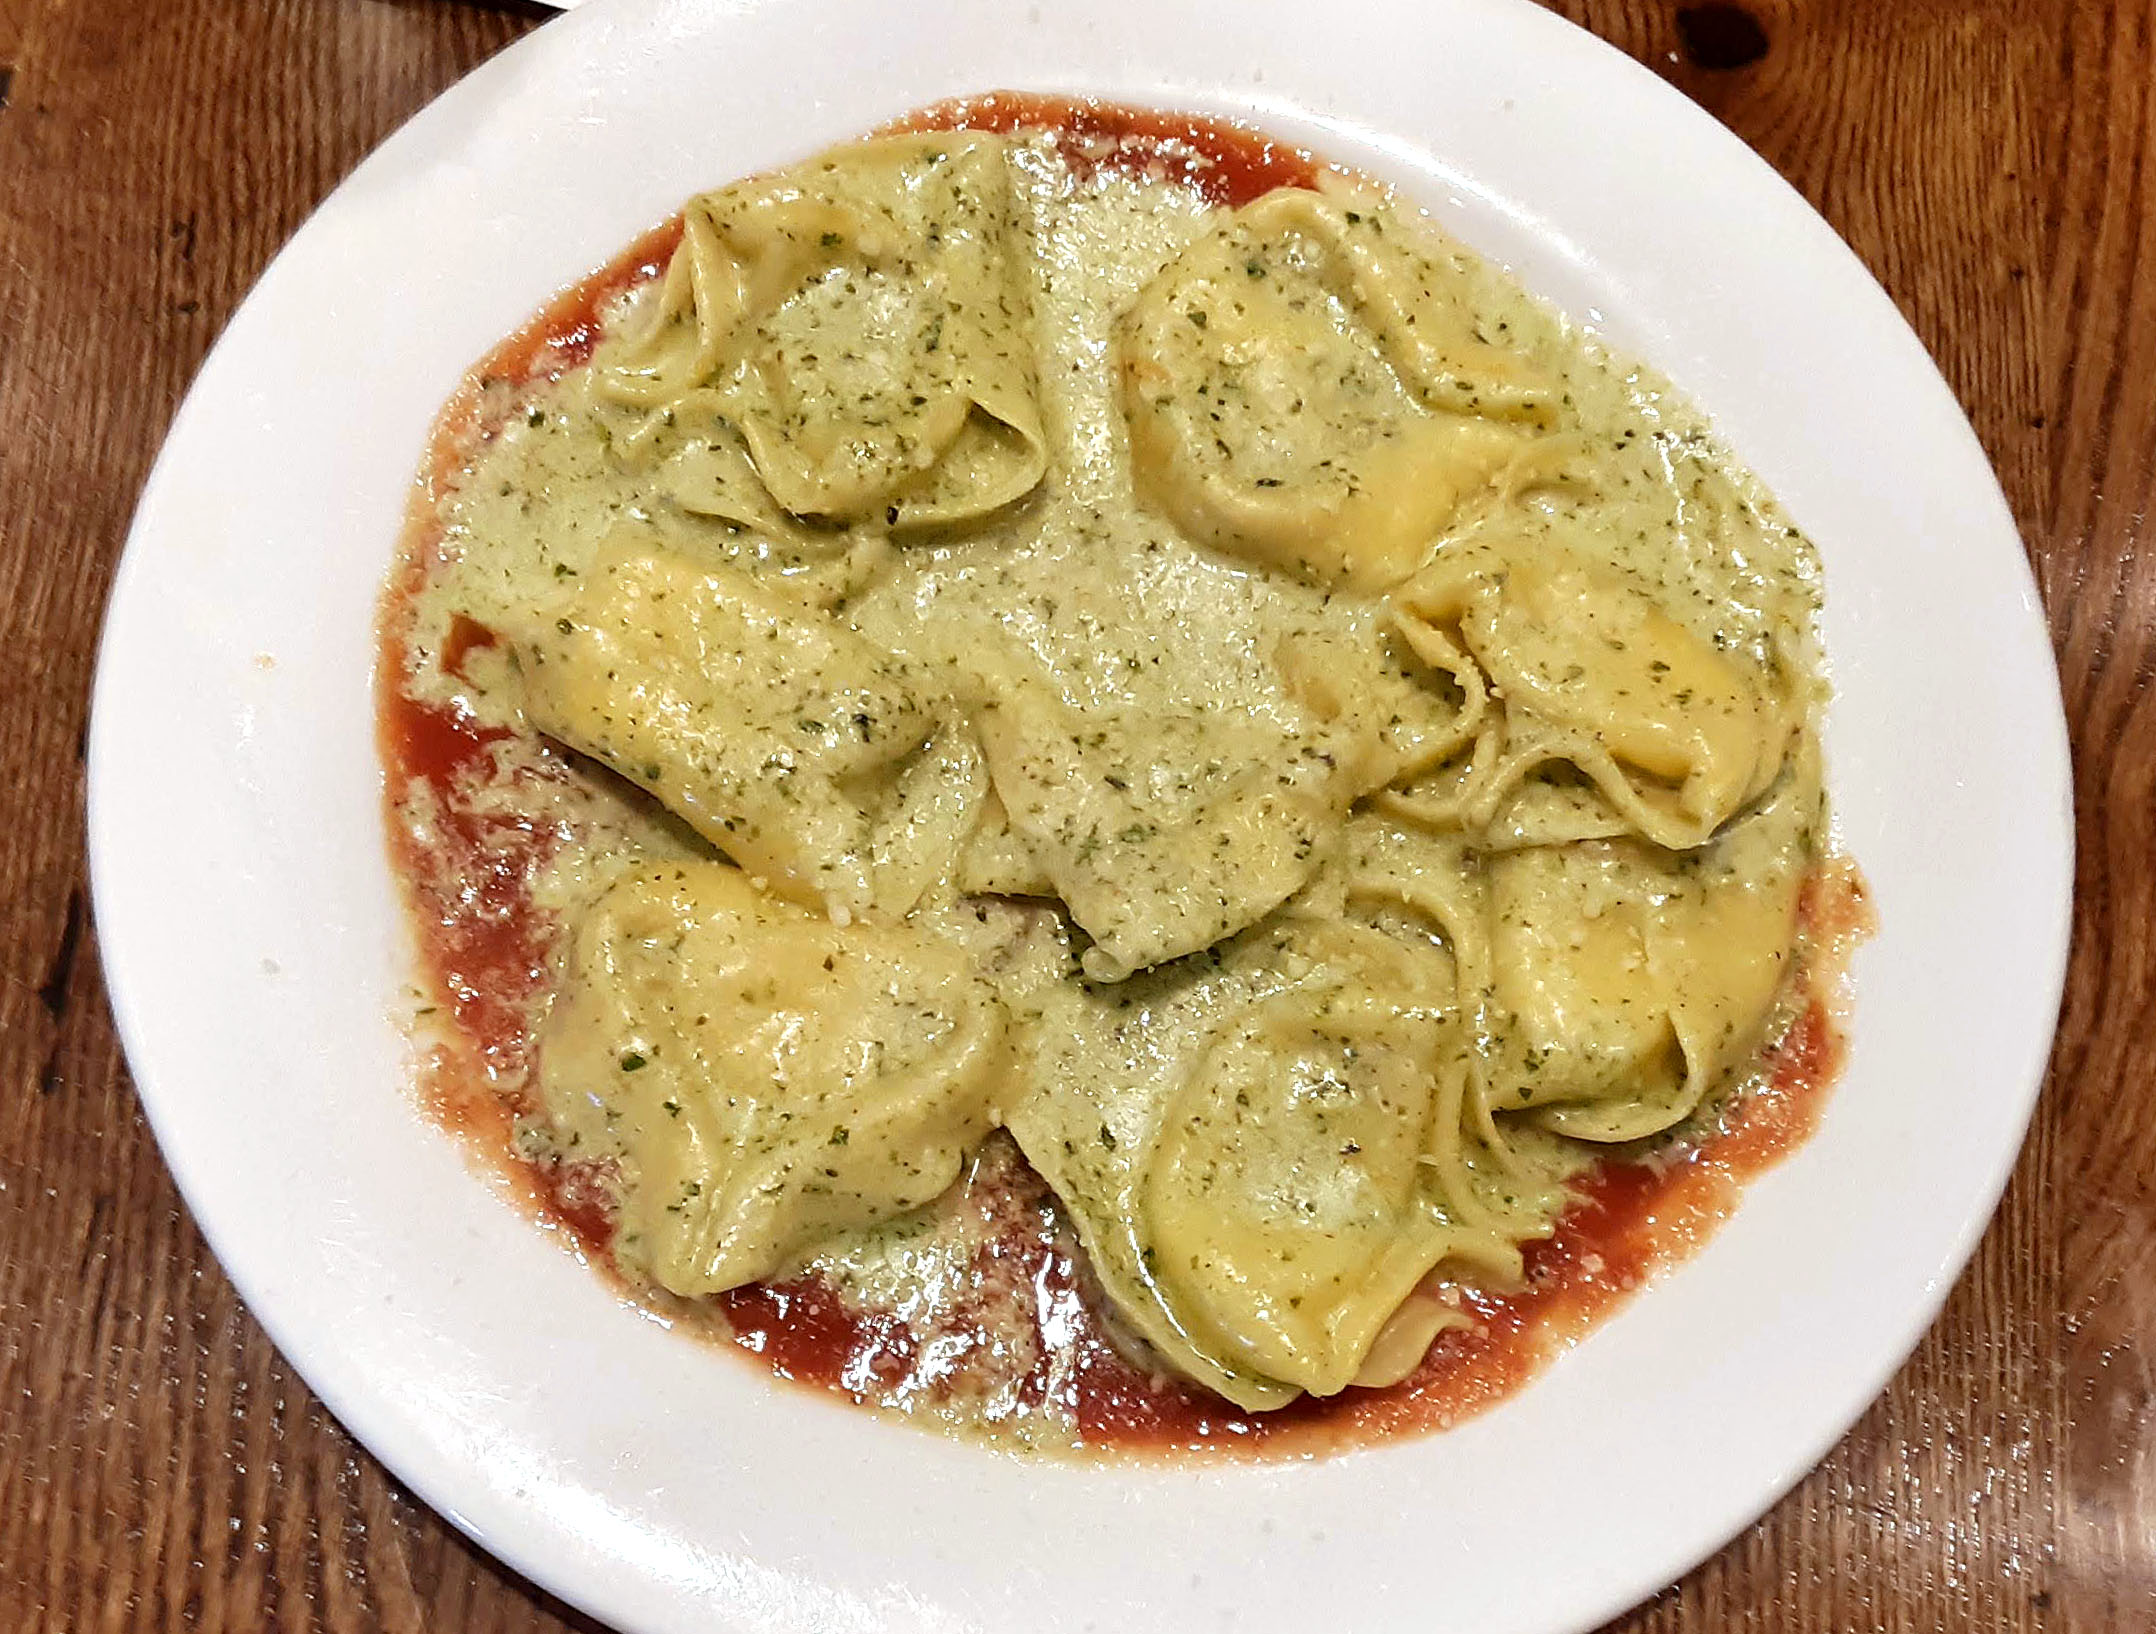 On a large white plate, a ton of ravioli with a white pesto sauce sits. Photo by Paul Young.